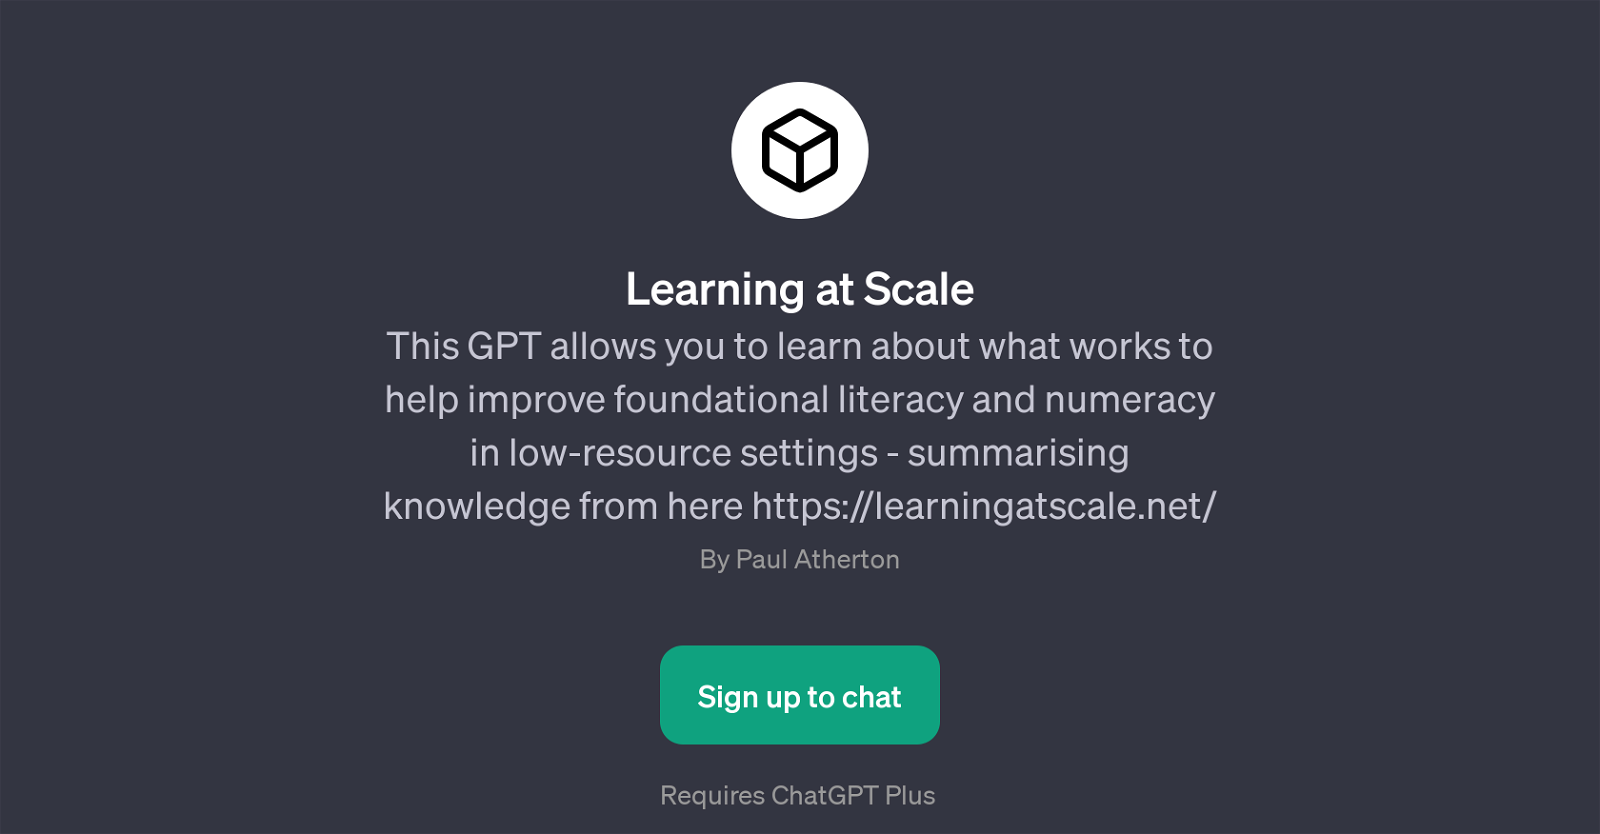 Learning at Scale website